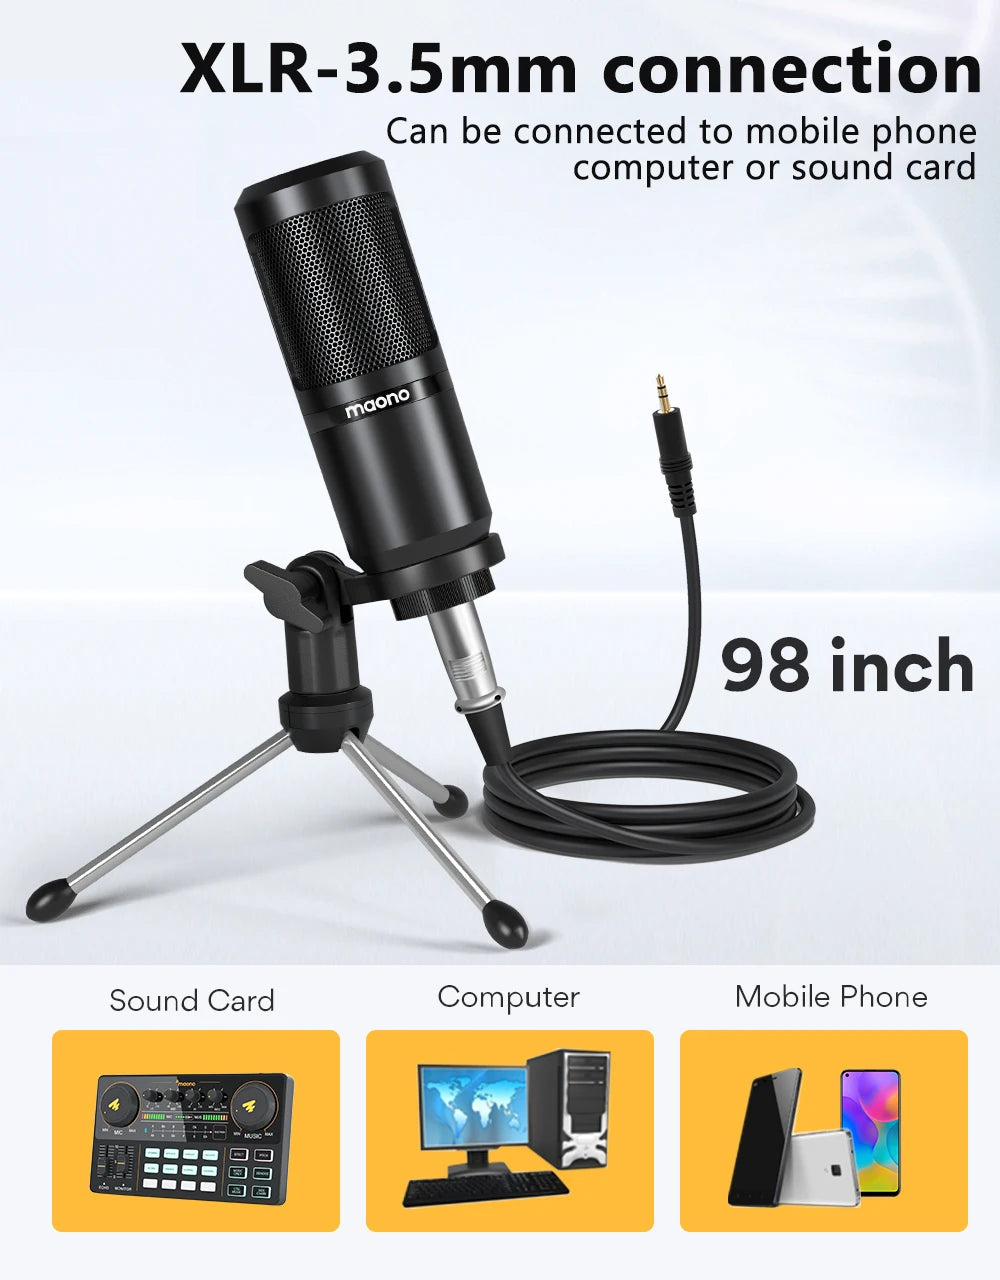 Maono PM360TR Condenser Microphone Podcast Microphone 3.5mm Mic for Computer,Laptop,Phone,Sound Card,YouTube,Gaming,Recording